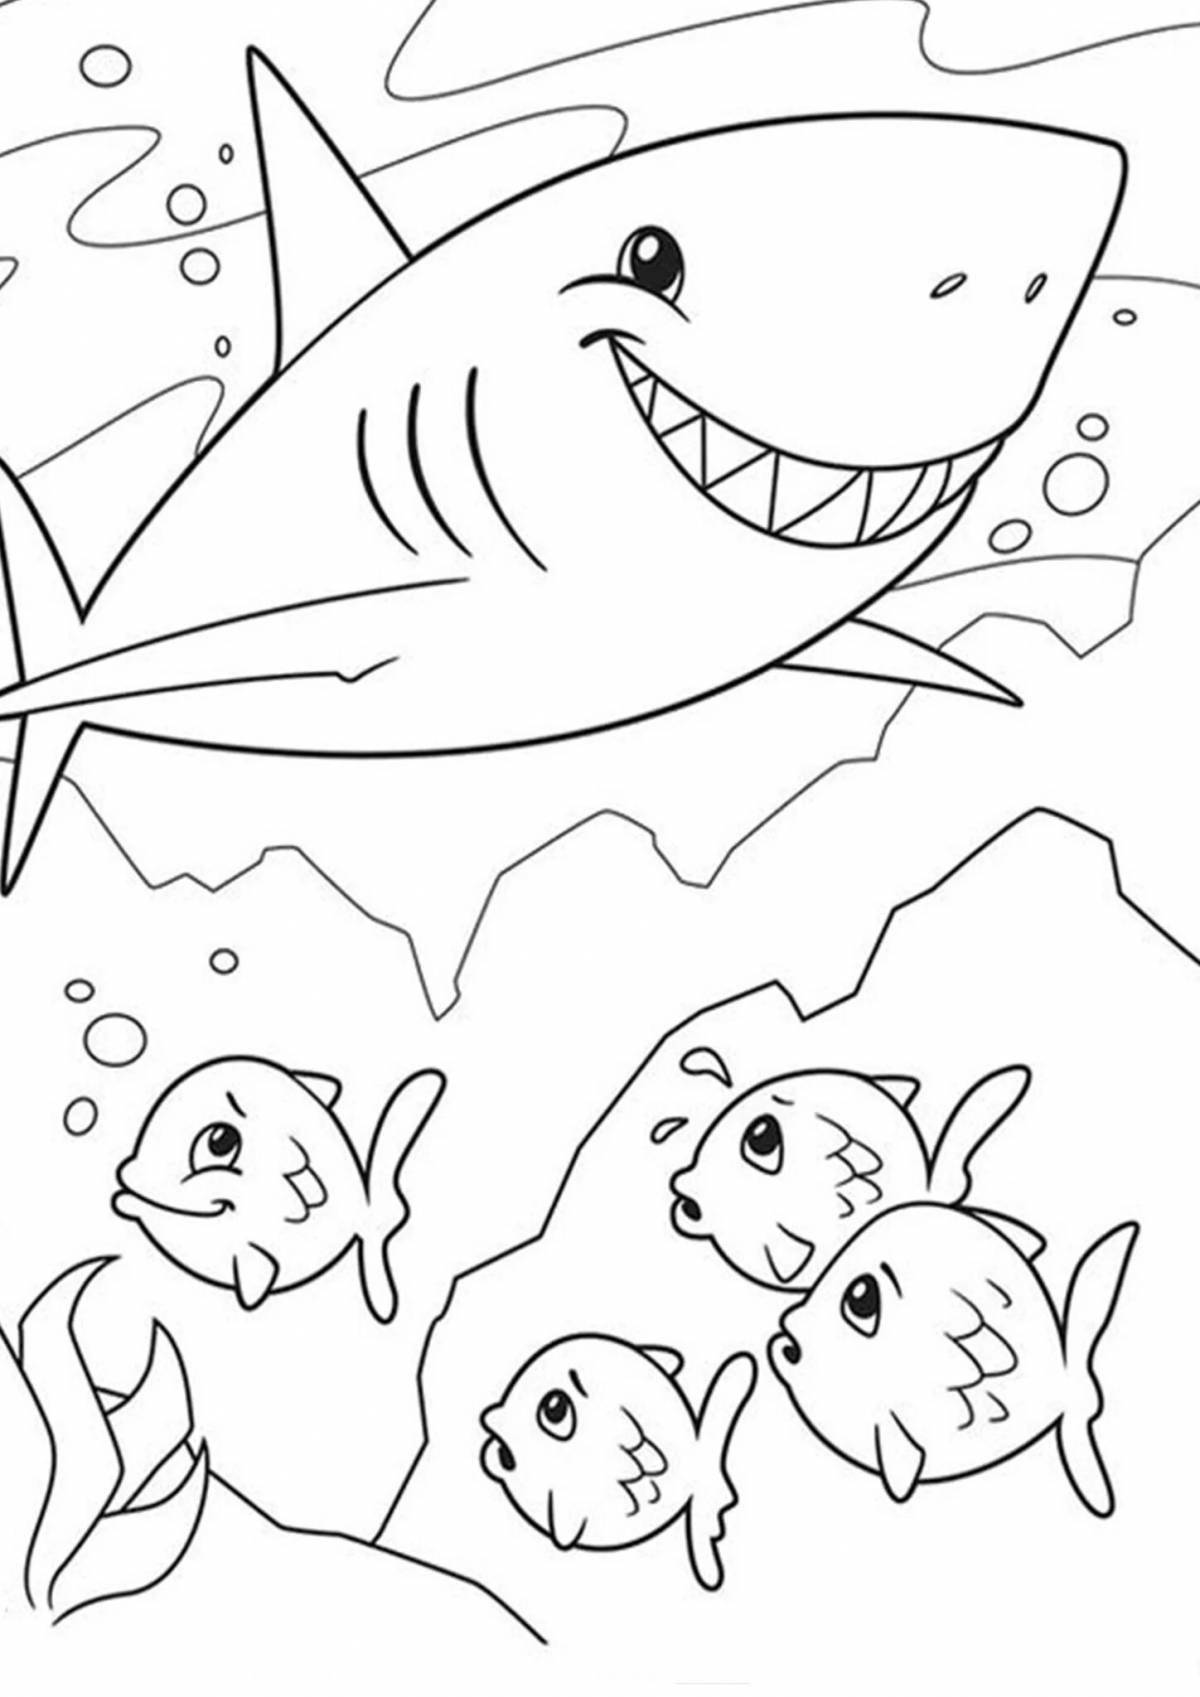 Joyful shark coloring book for 4-5 year olds